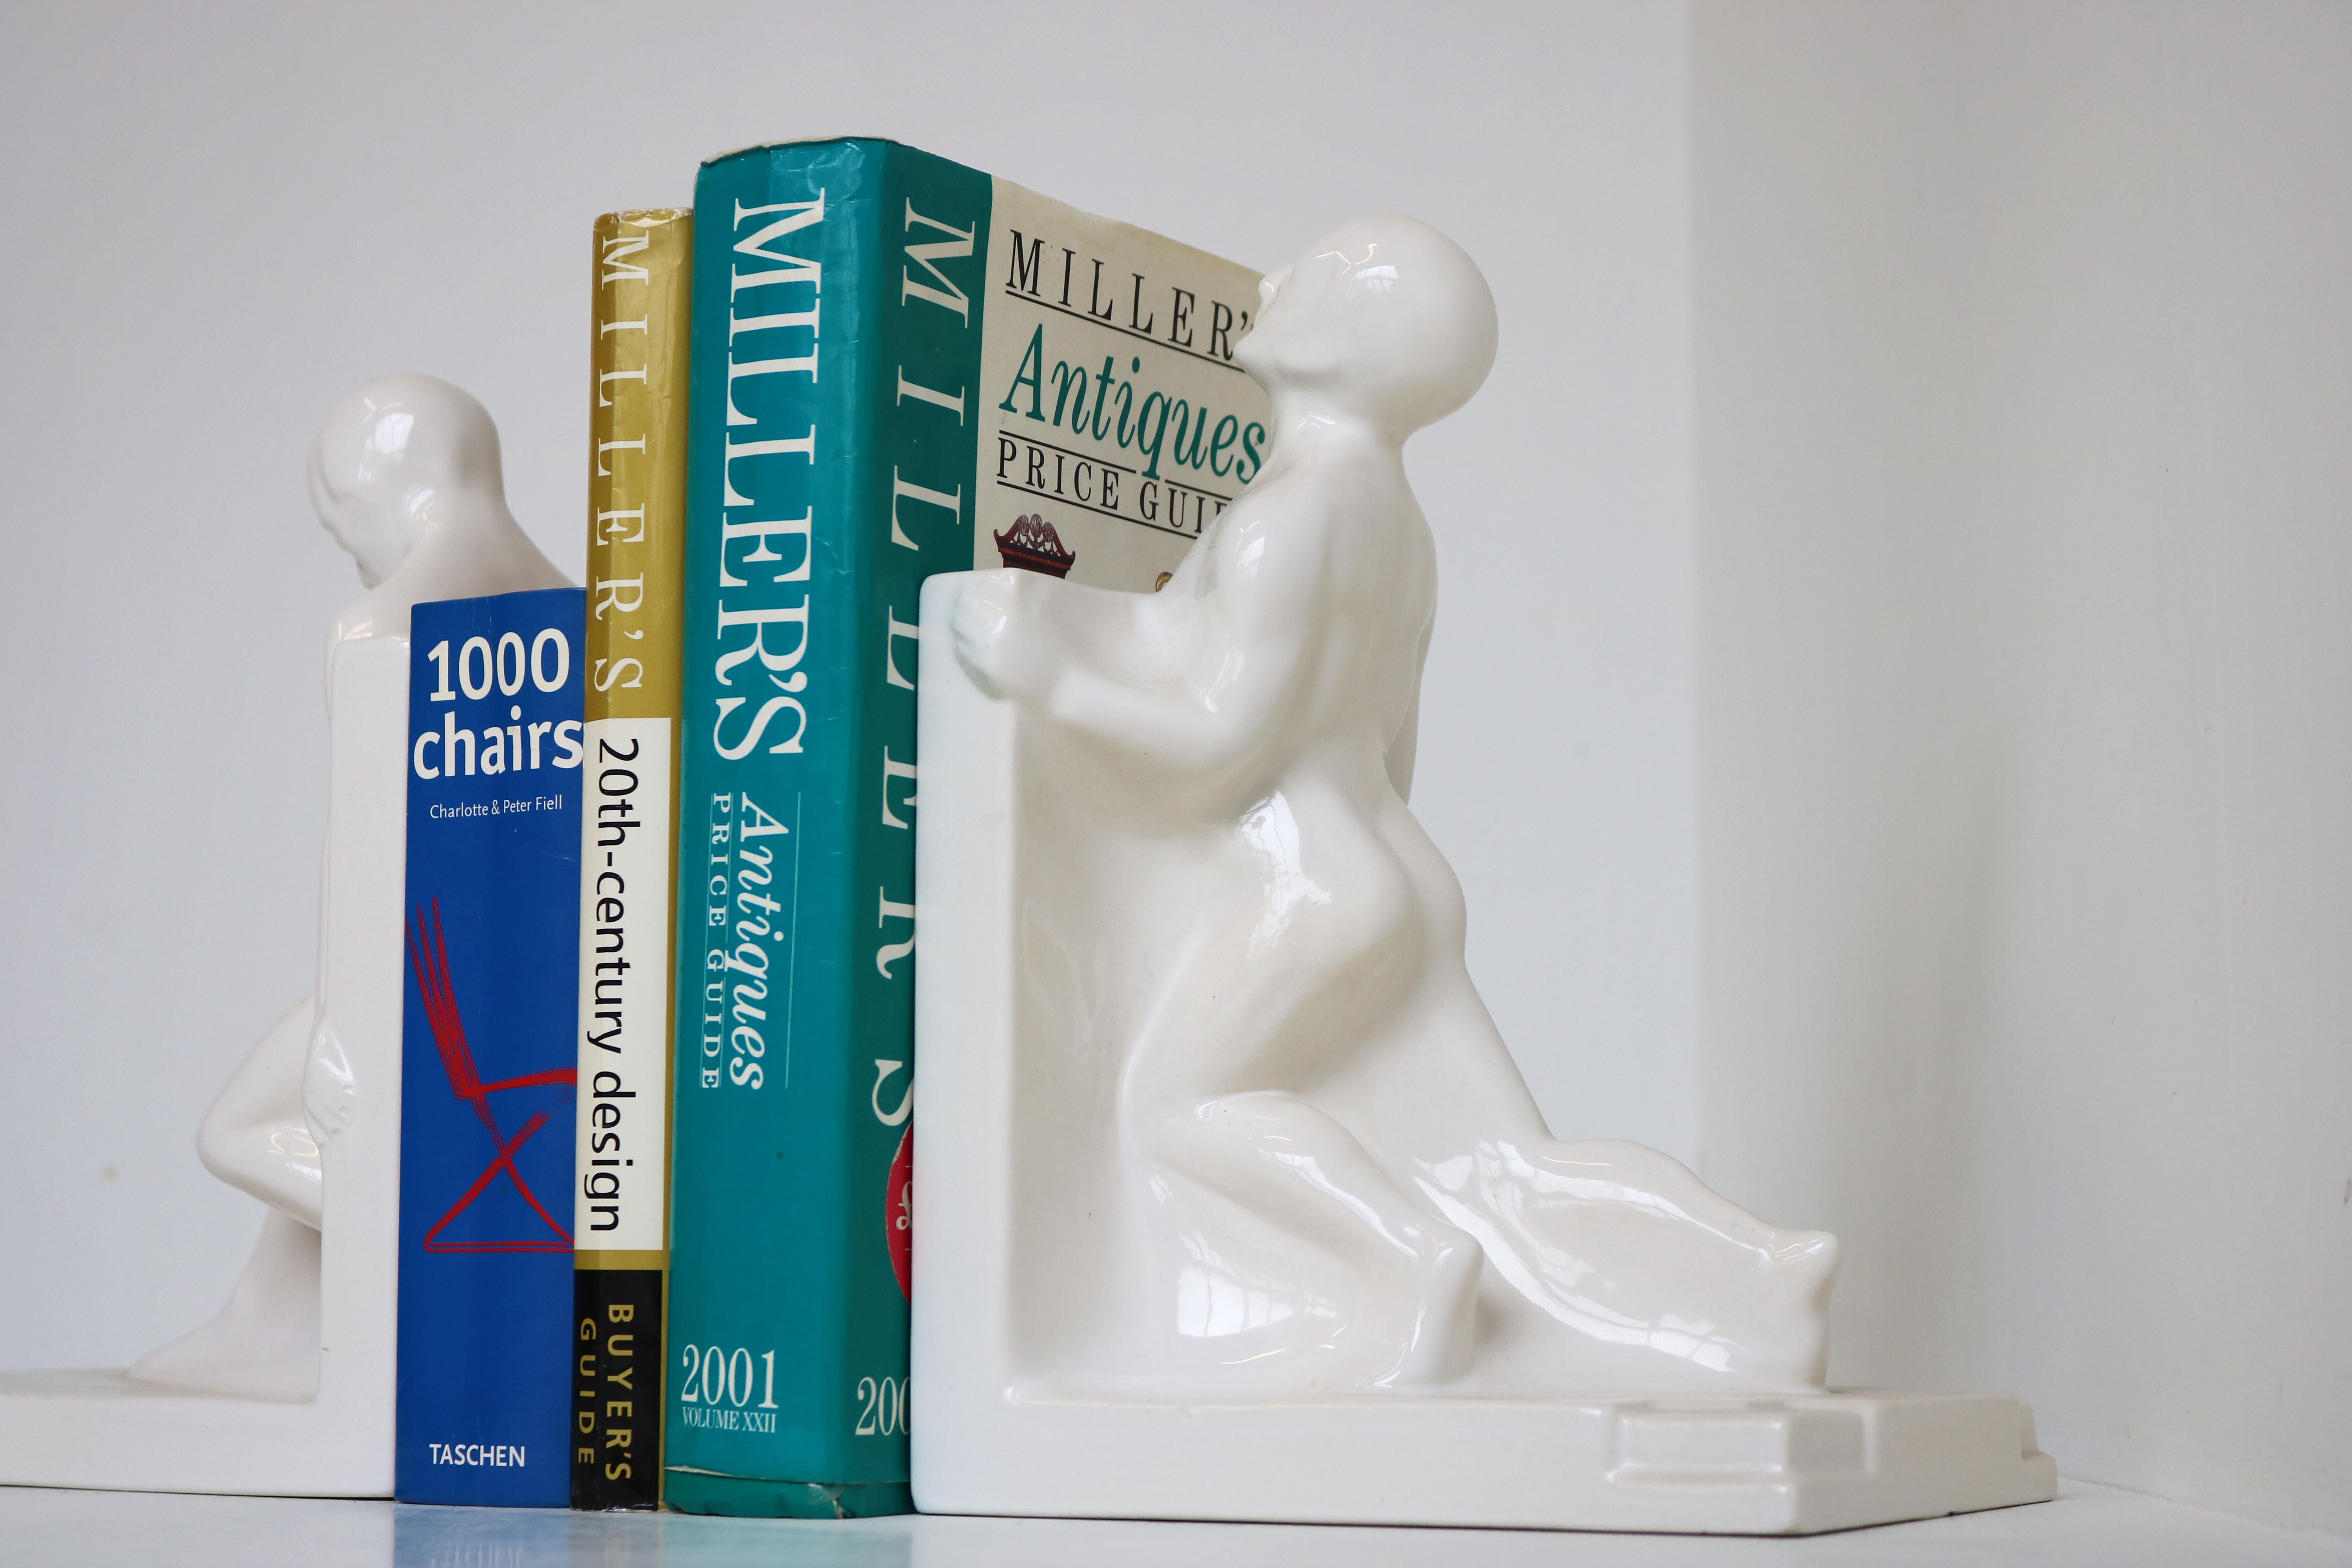 Gorgeous Dutch ceramic pottery Art Deco bookends. Designed by Godefridus Boonenkamp in 1931.
Very nice, large bookends, made of white baked earthenware with a beautiful glaze layer. Made at Plateelbakkerij Schoonhoven. This model is depicted on